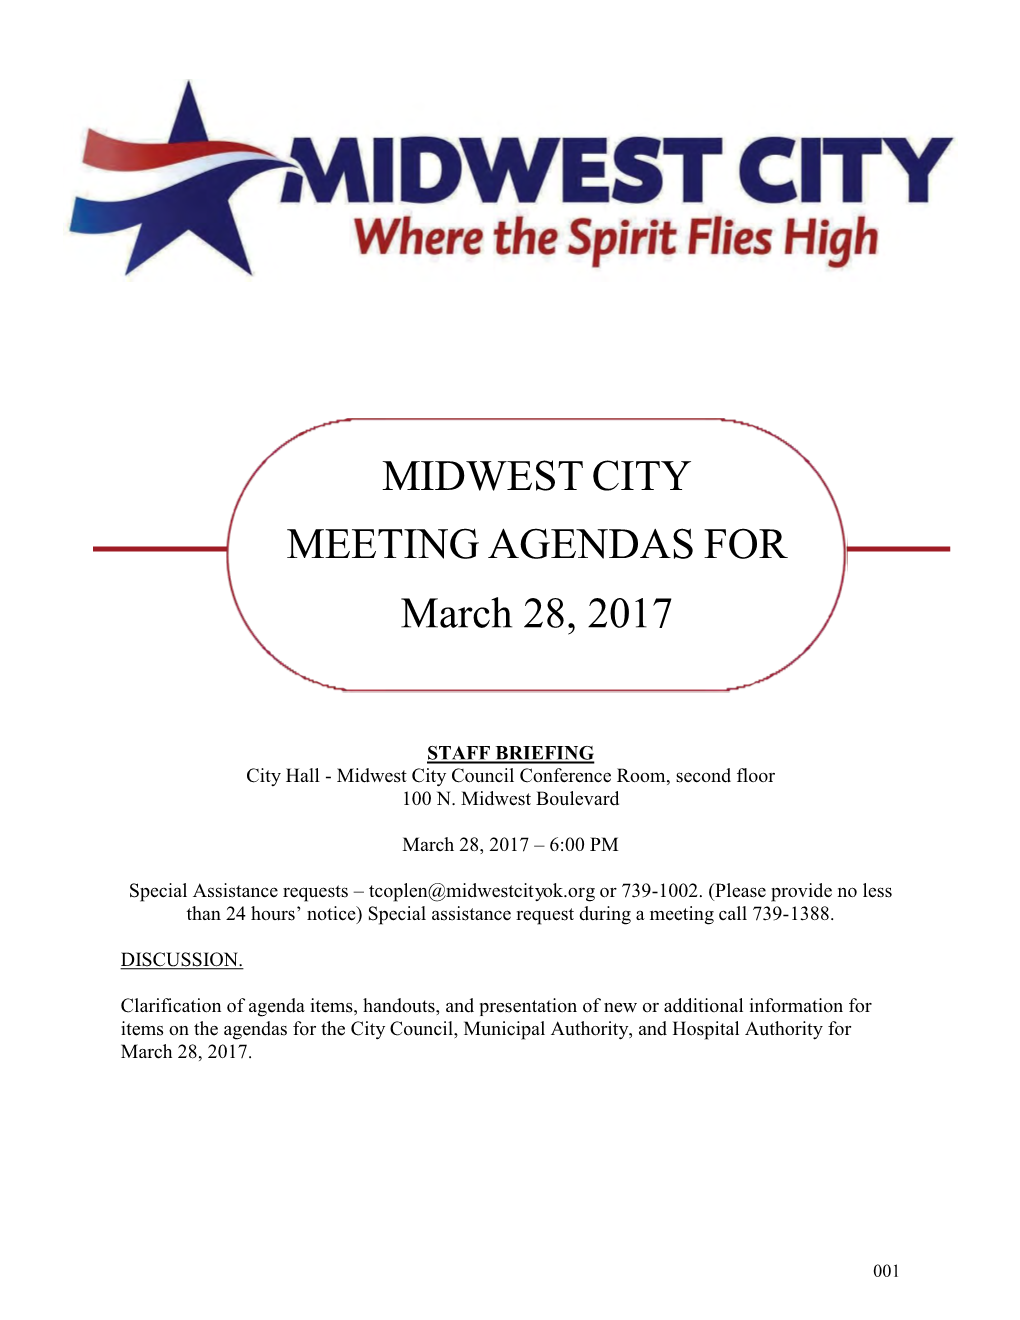 MIDWEST CITY MEETING AGENDAS for March 28, 2017